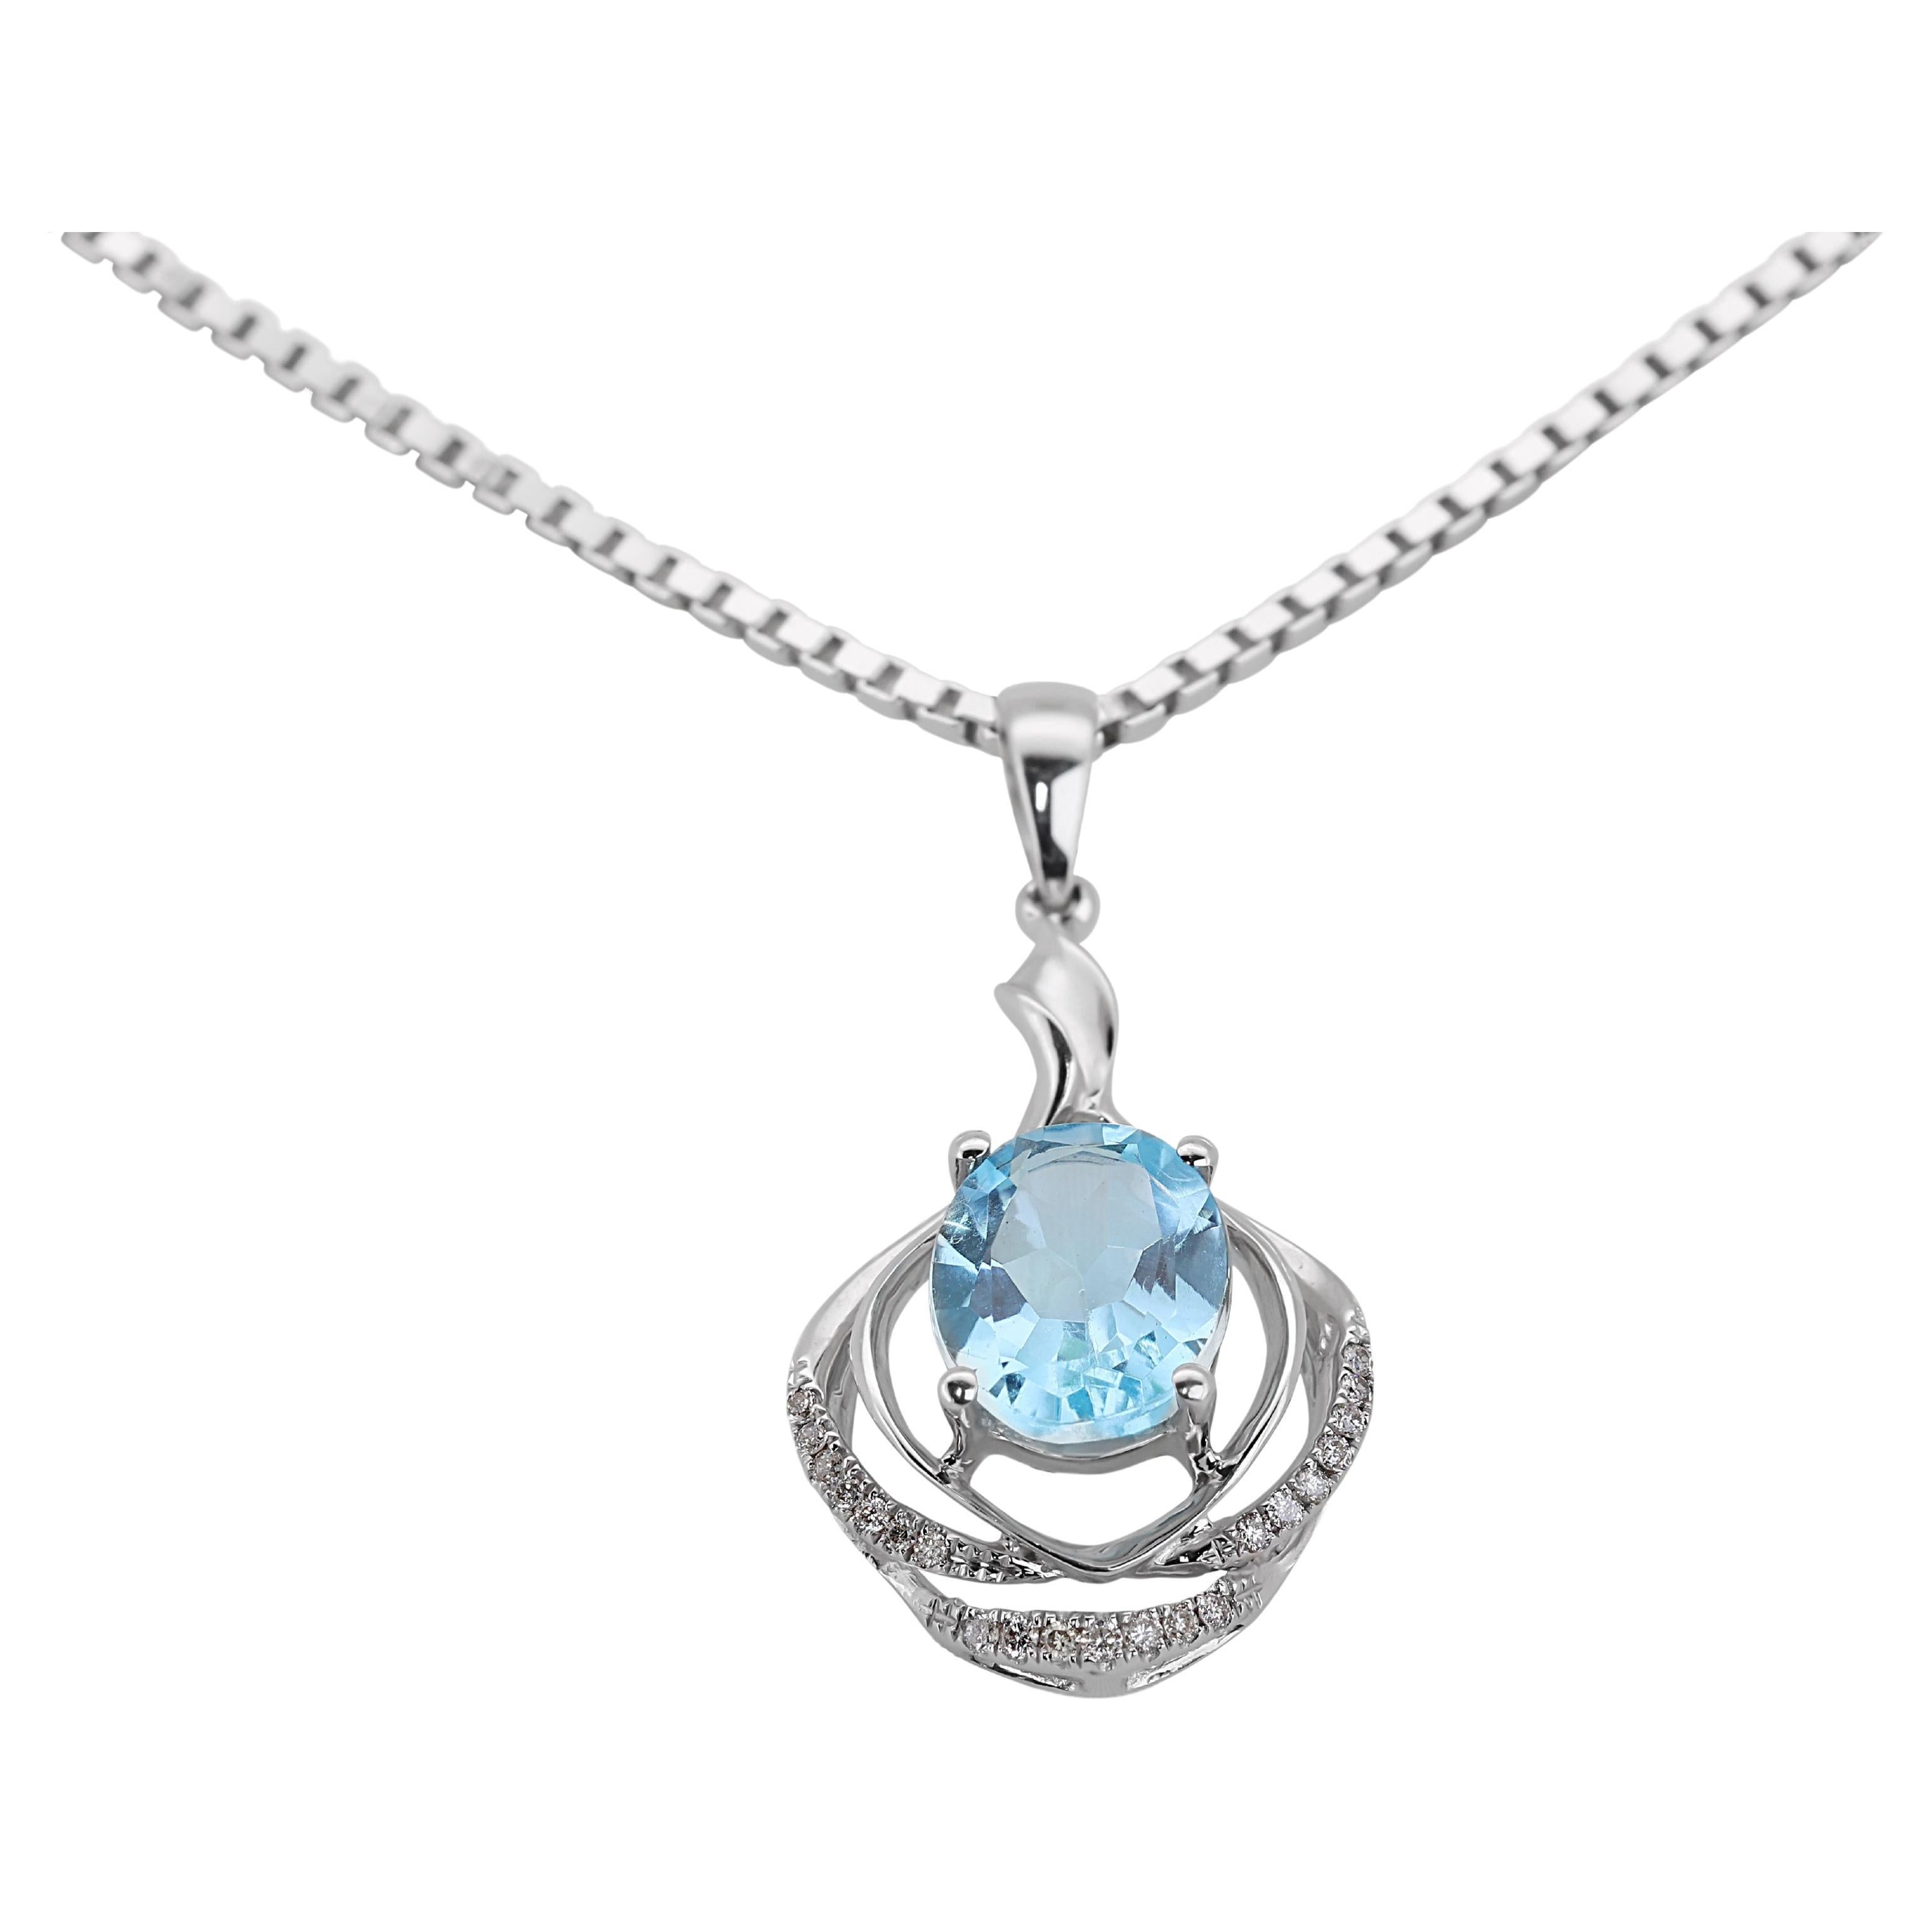 Stunning 10k White Gold Necklace with 3.16 Ct Natural Diamonds and Topaz For Sale